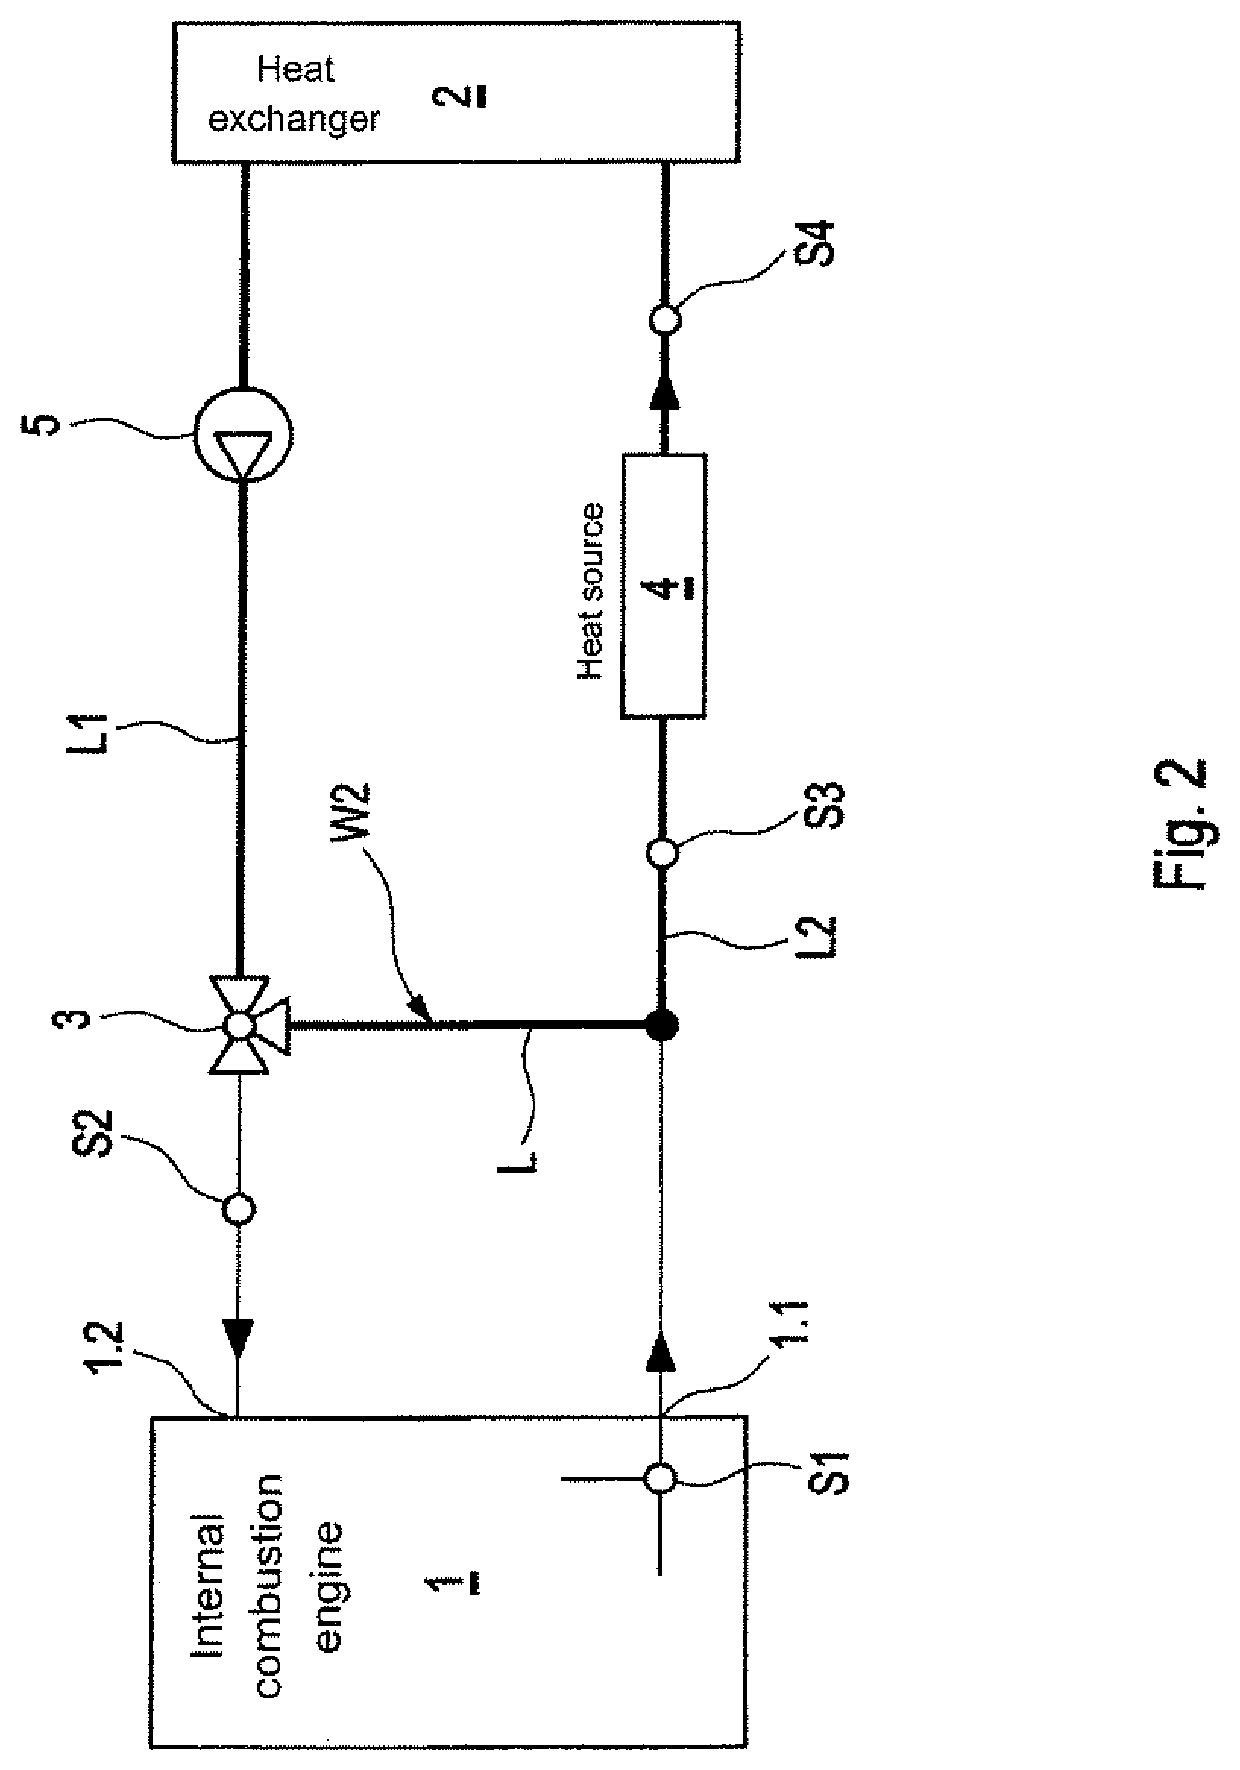 Heating system and method for heating a vehicle interior of a vehicle having an internal combustion engine